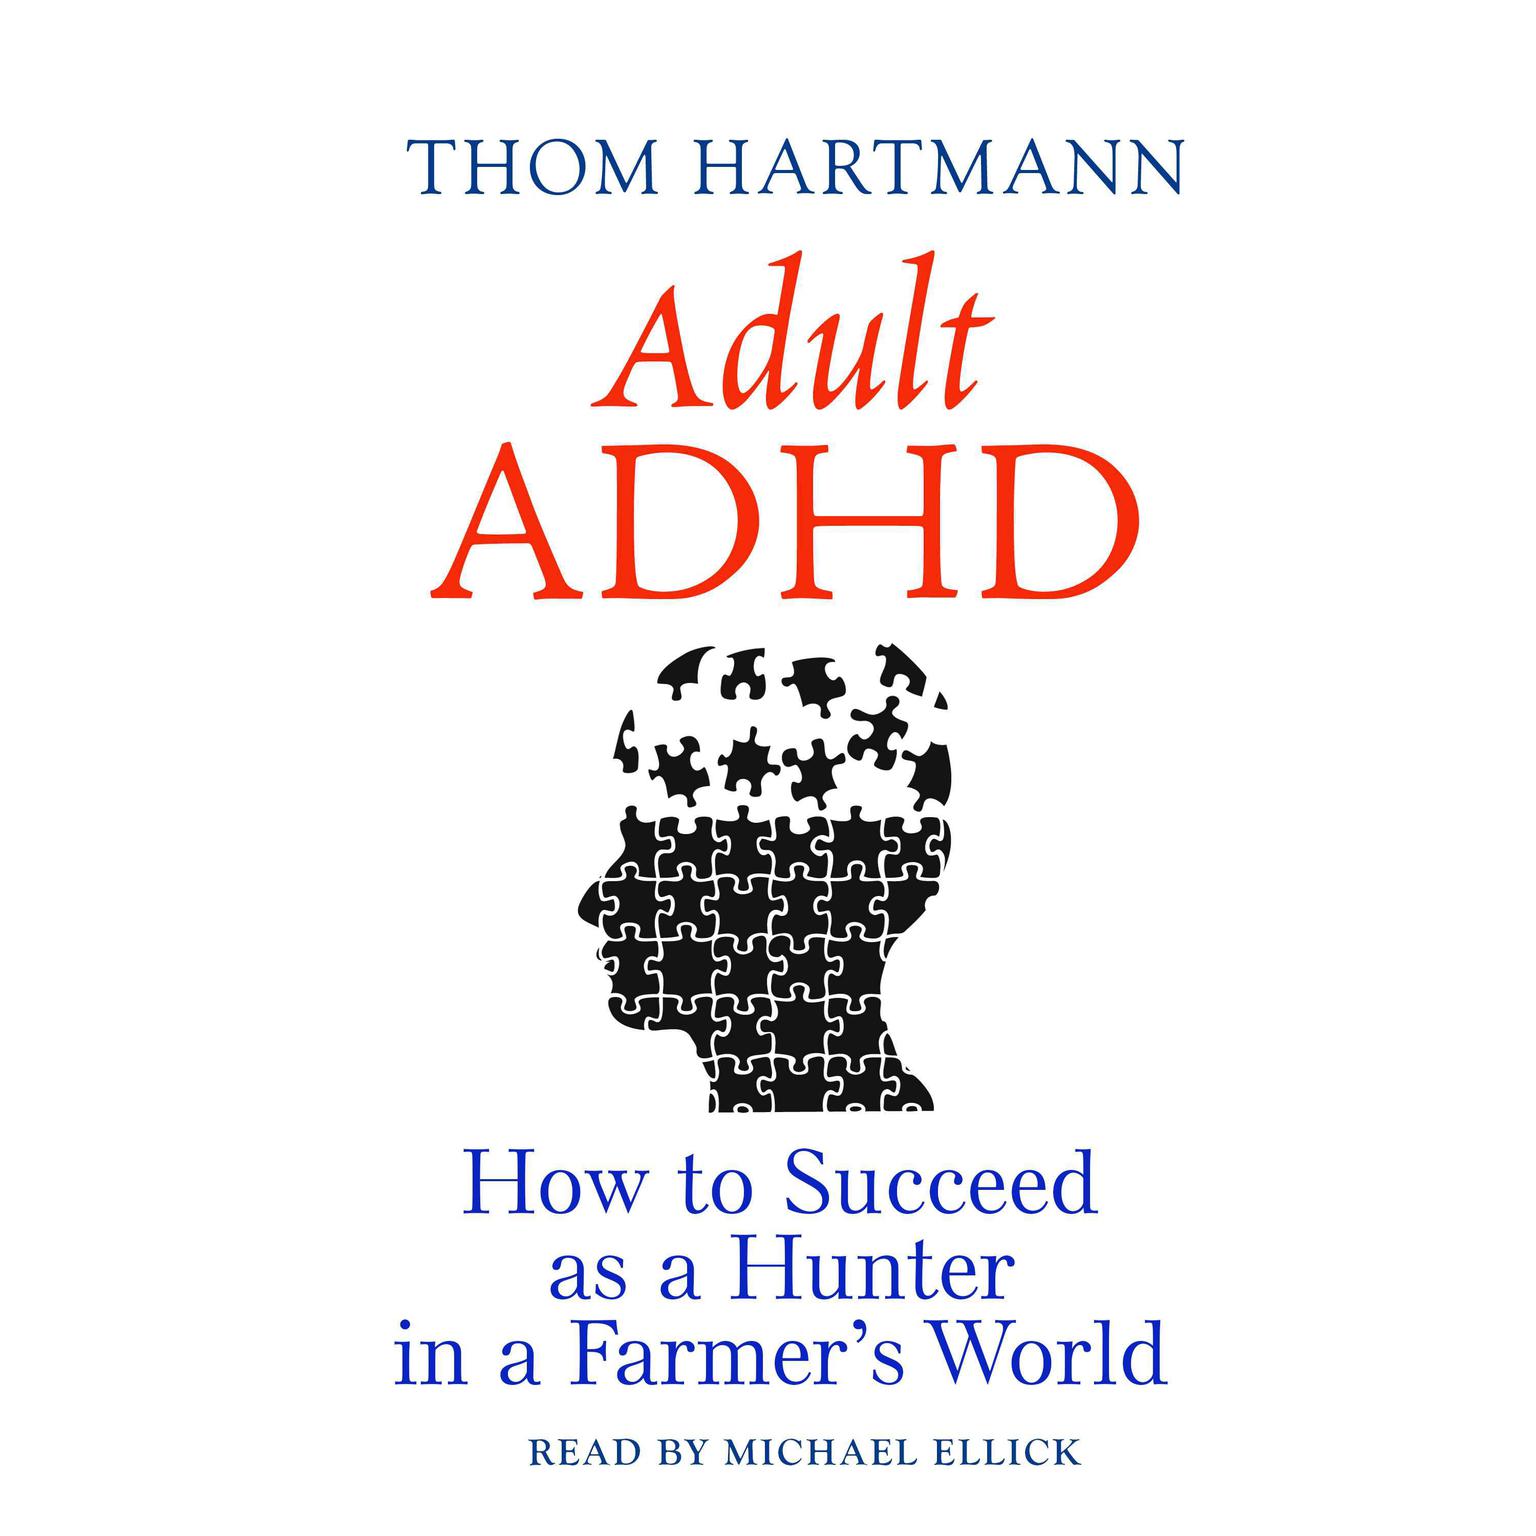 Adult ADHD: How to Succeed as a Hunter in a Farmers World Audiobook, by Thom Hartmann